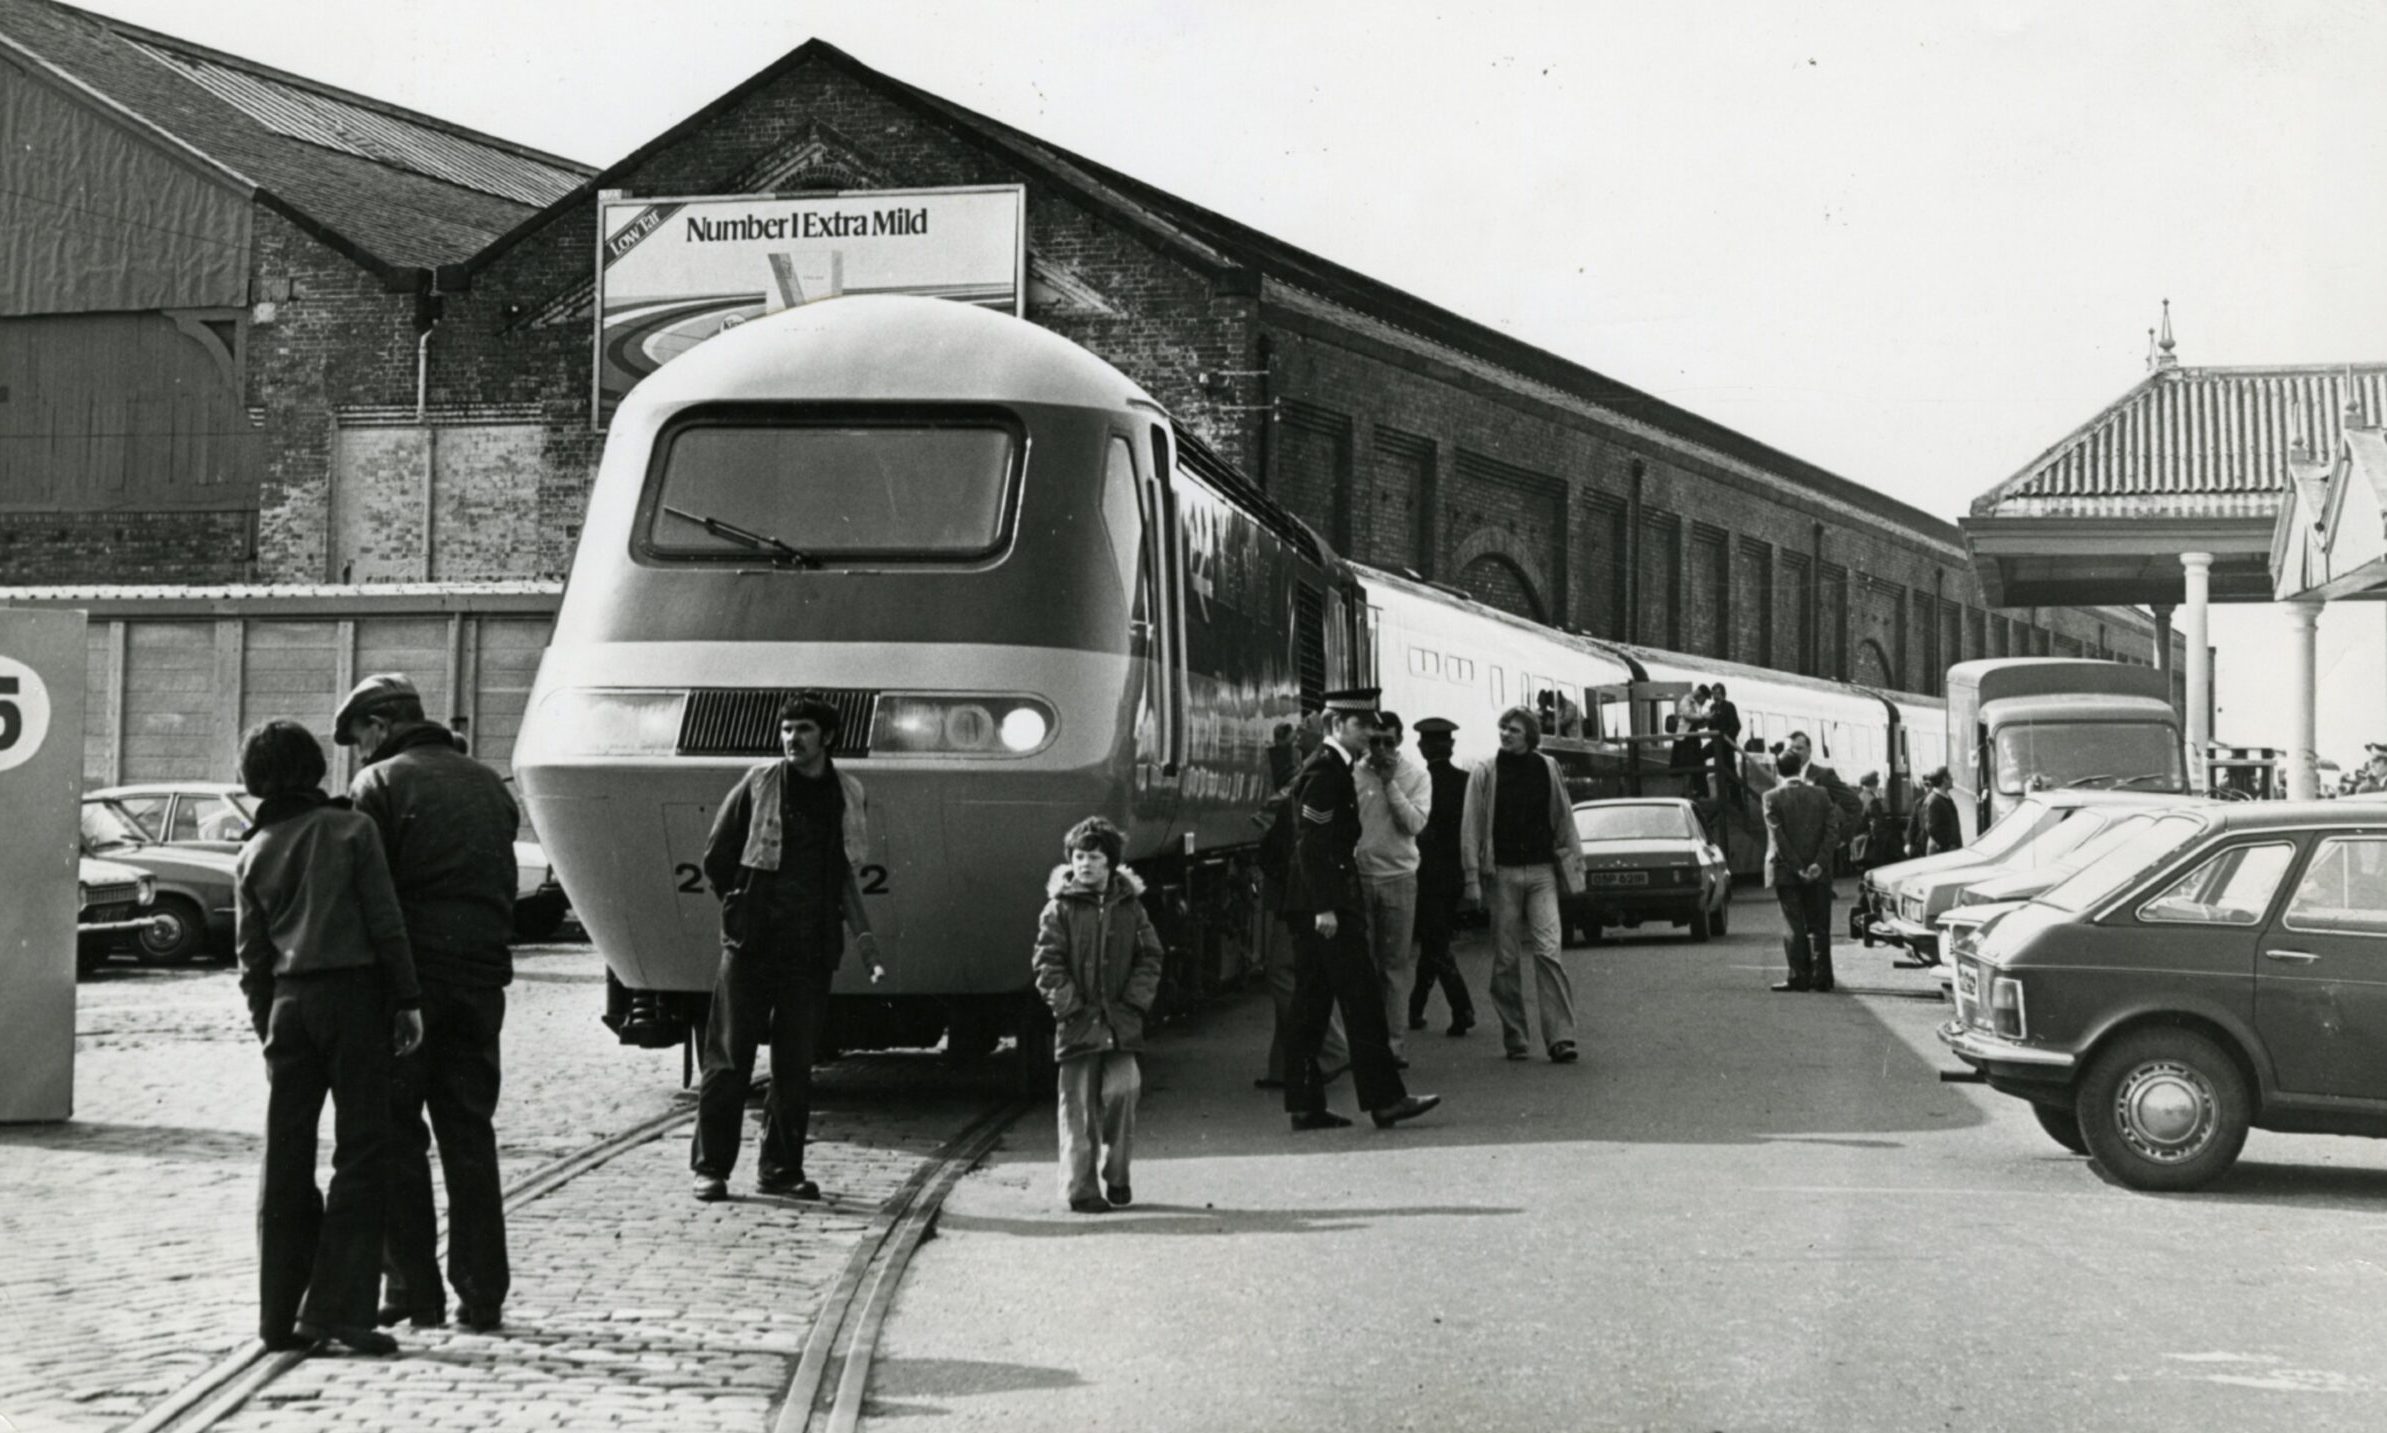 The InterCity 125 on show in Dundee in April 1978.